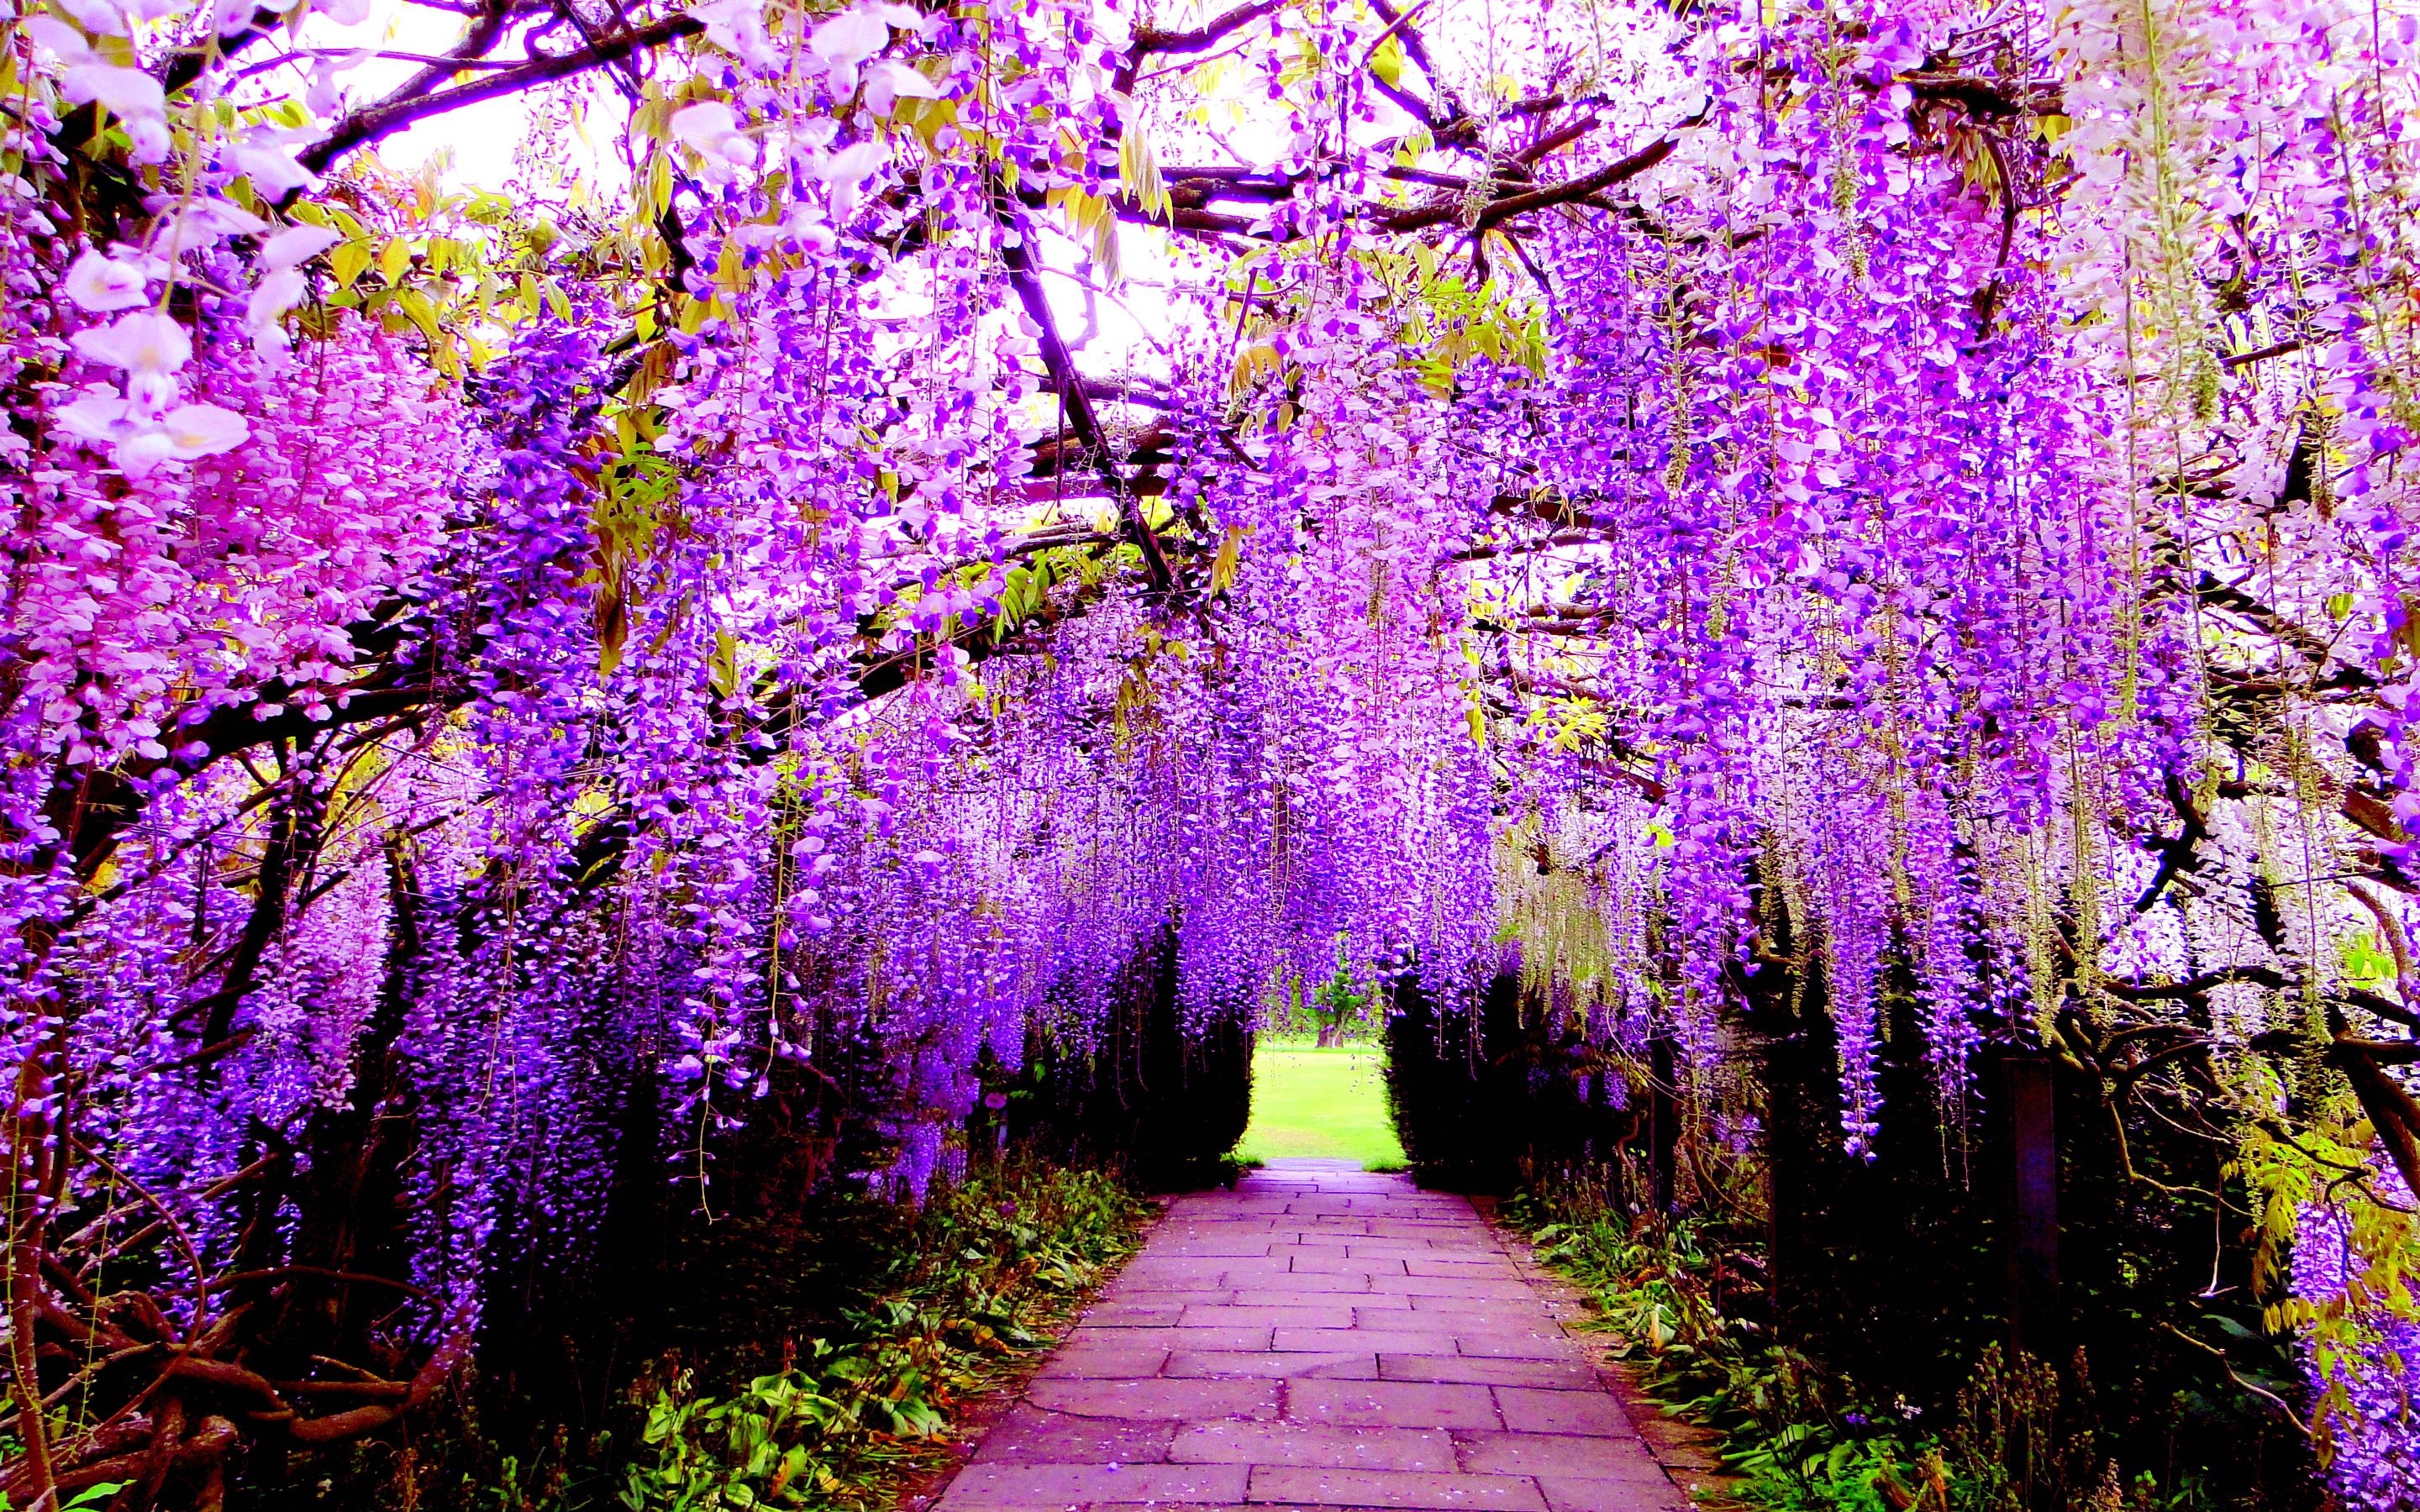 Wisteria Tree Vine are famously known for the Wisteria Flower Tunnels in Japan, its one of my favorite trees and they smell incredible.